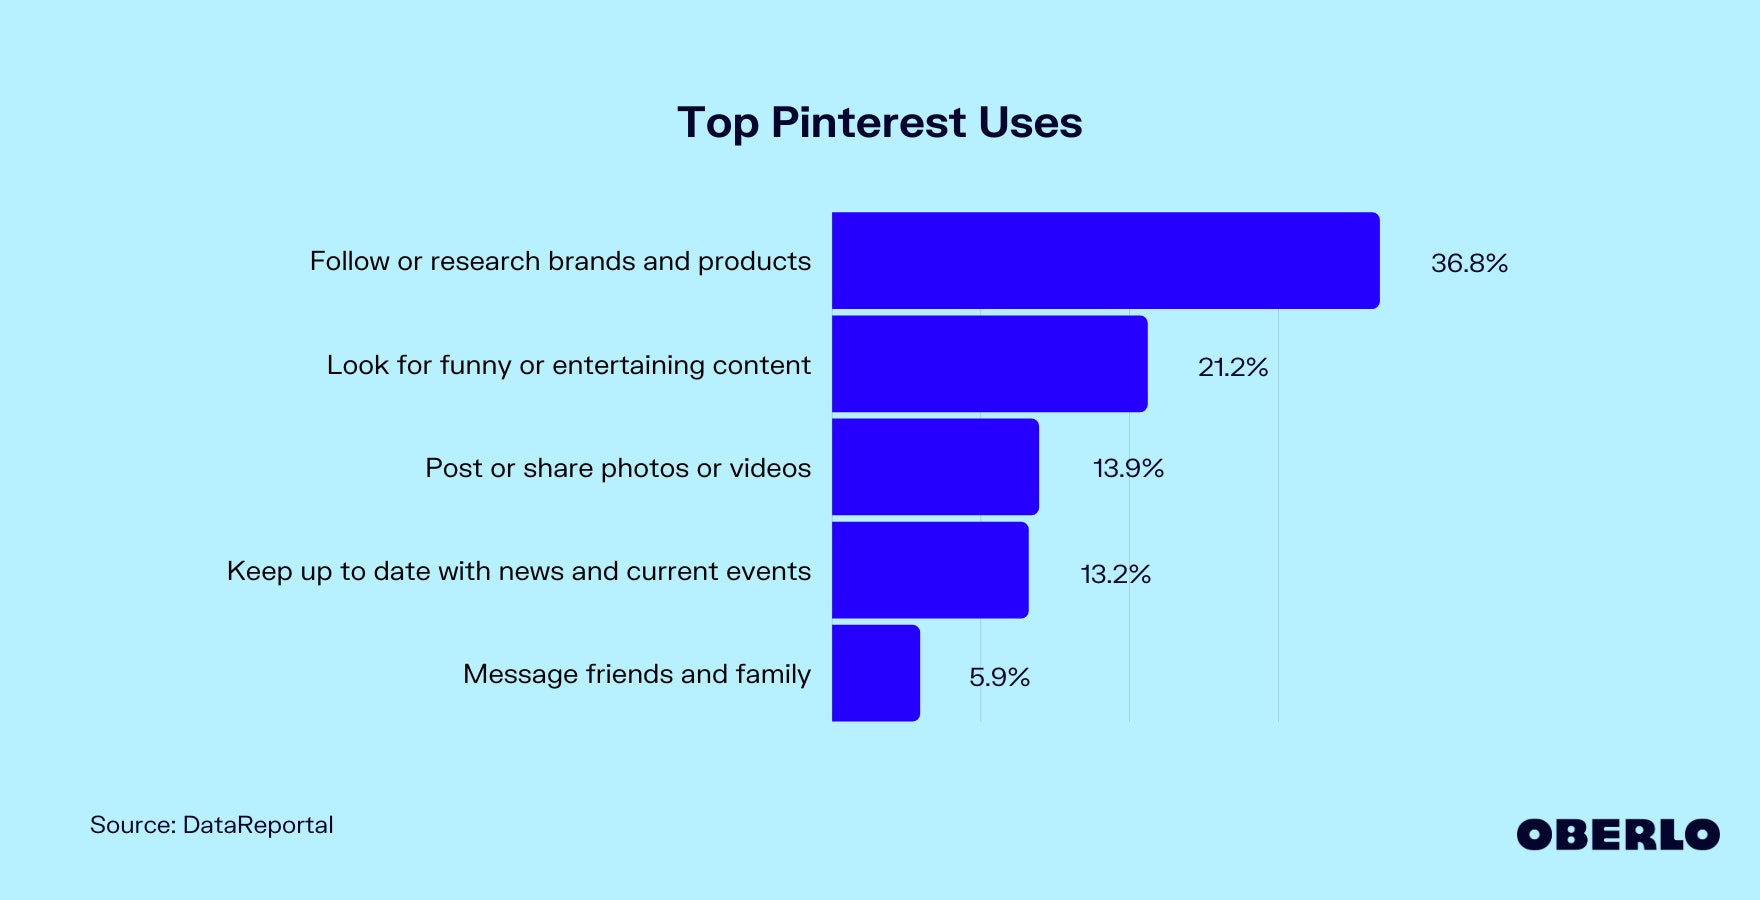 Chart showing the top Pinterest uses